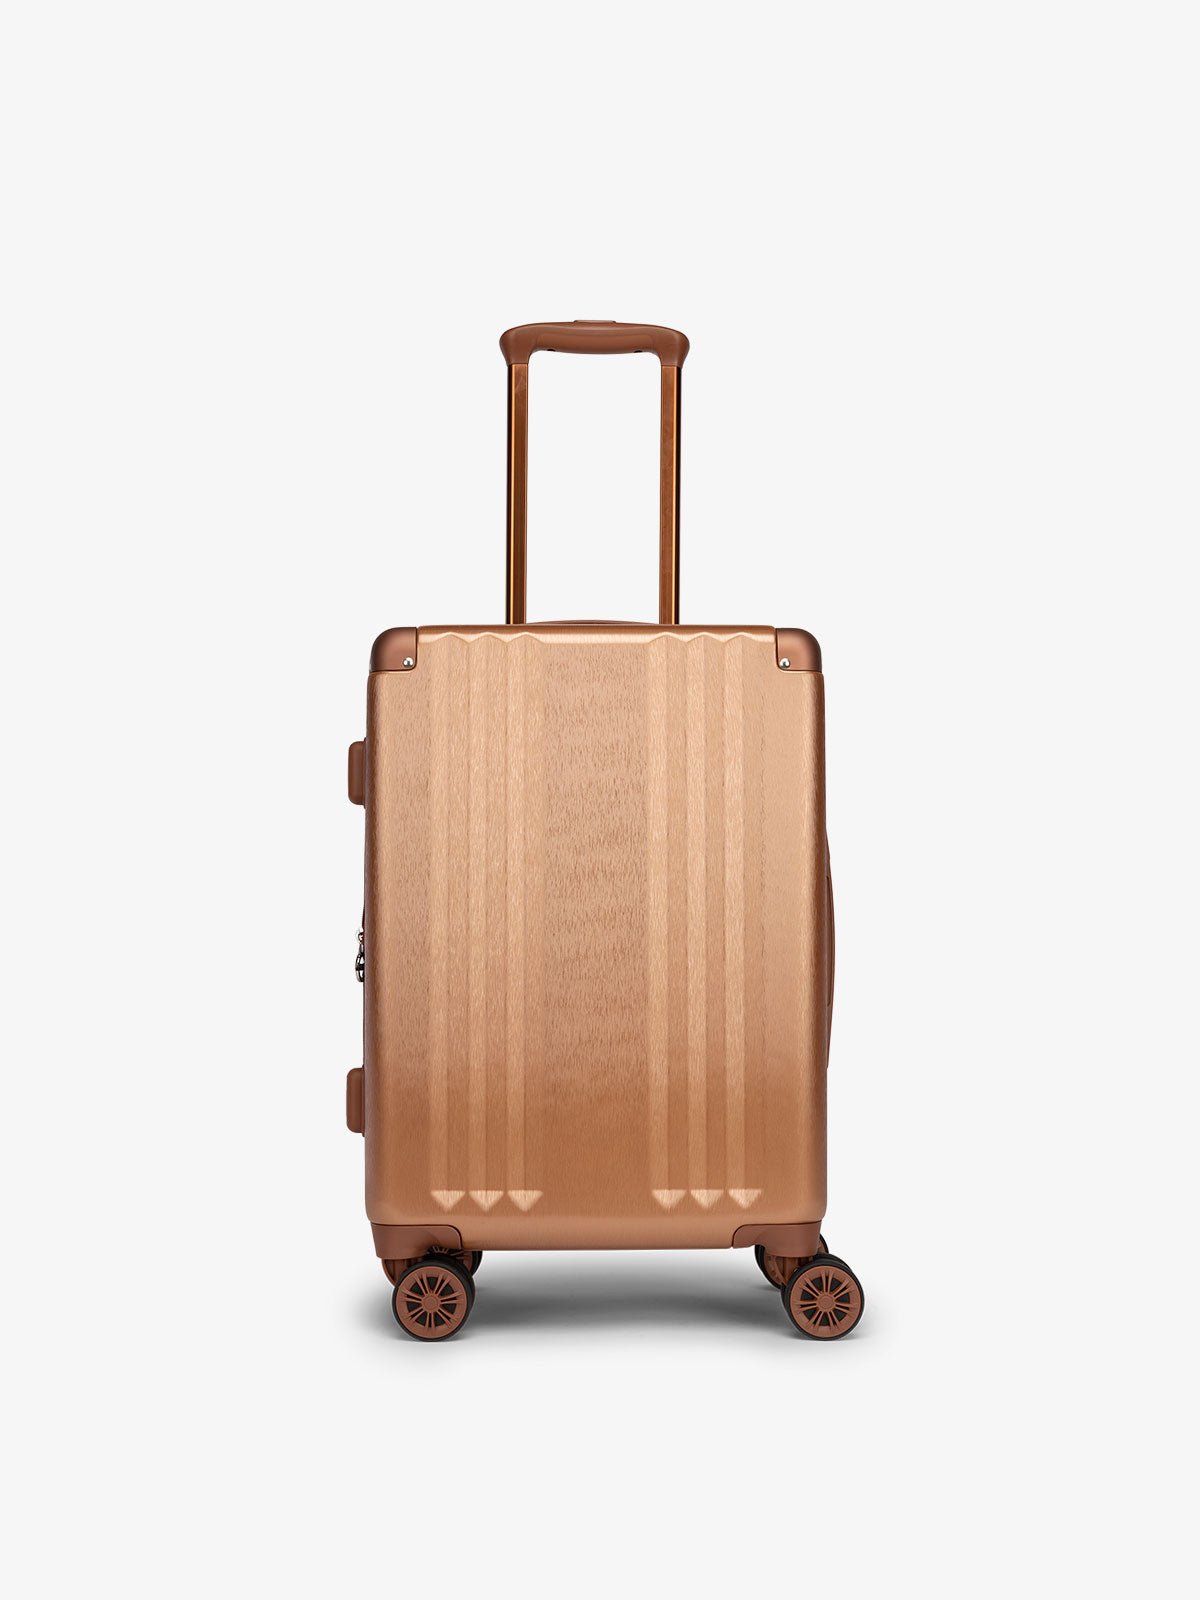 Copper CALPAK Ambeur hard shell rolling carry-on suitcase as part of the luggage set